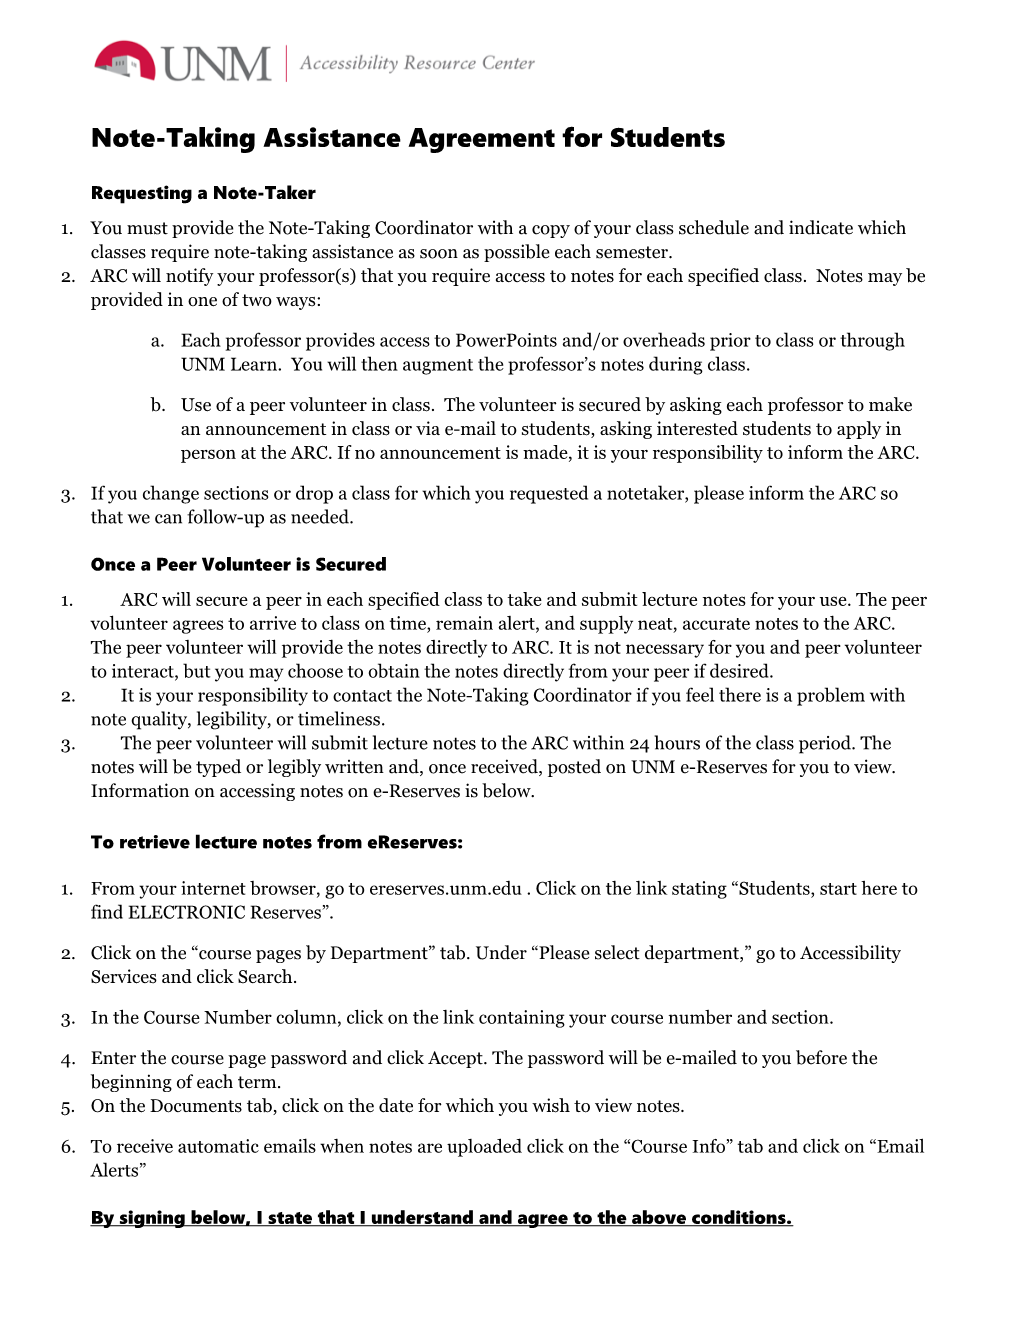 Note Taker Agreement for Students